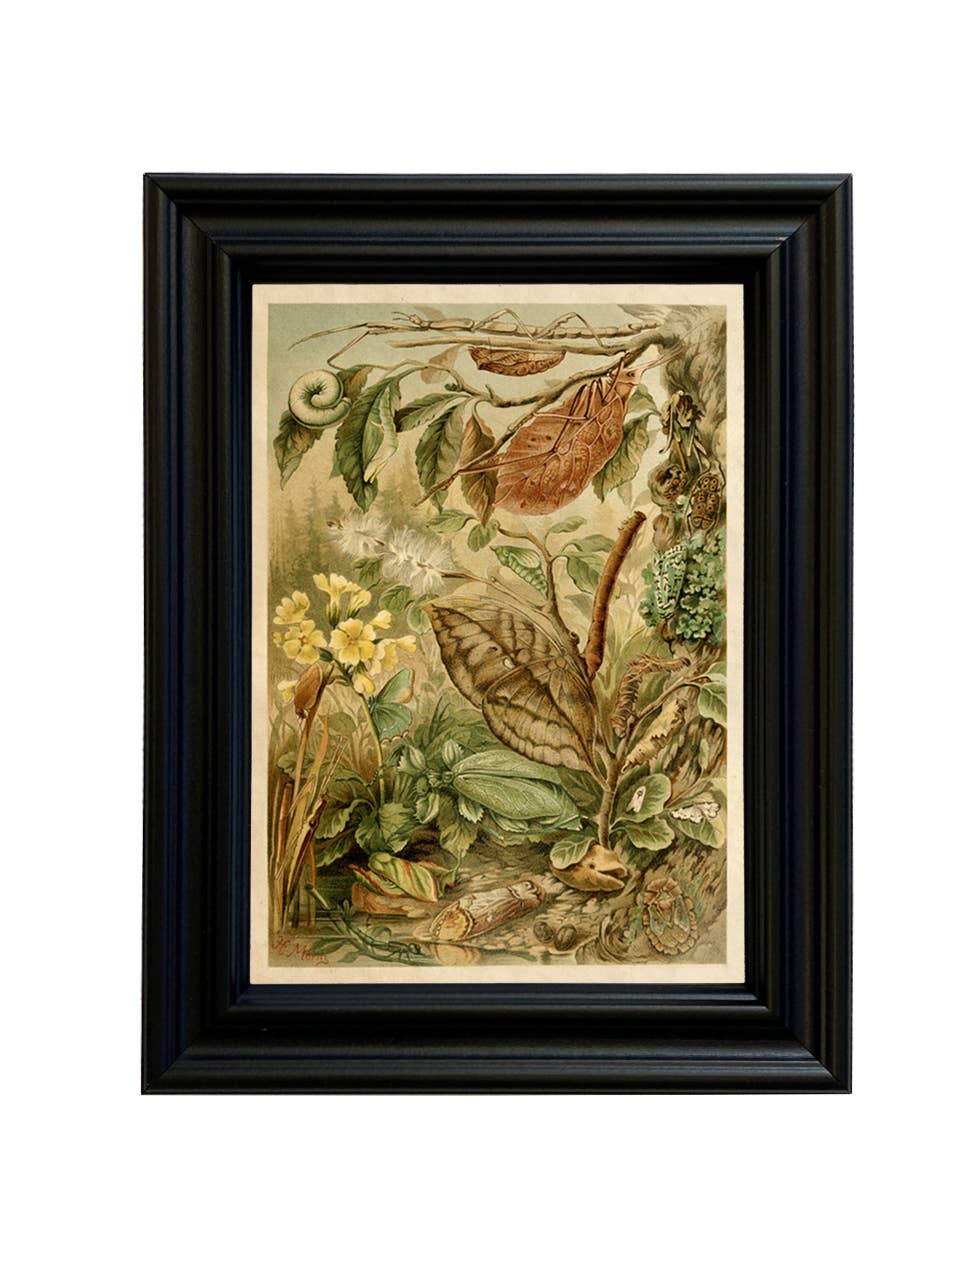 Mimicry Insects Cottagecore Framed Reproduction Print: 5" x 7"